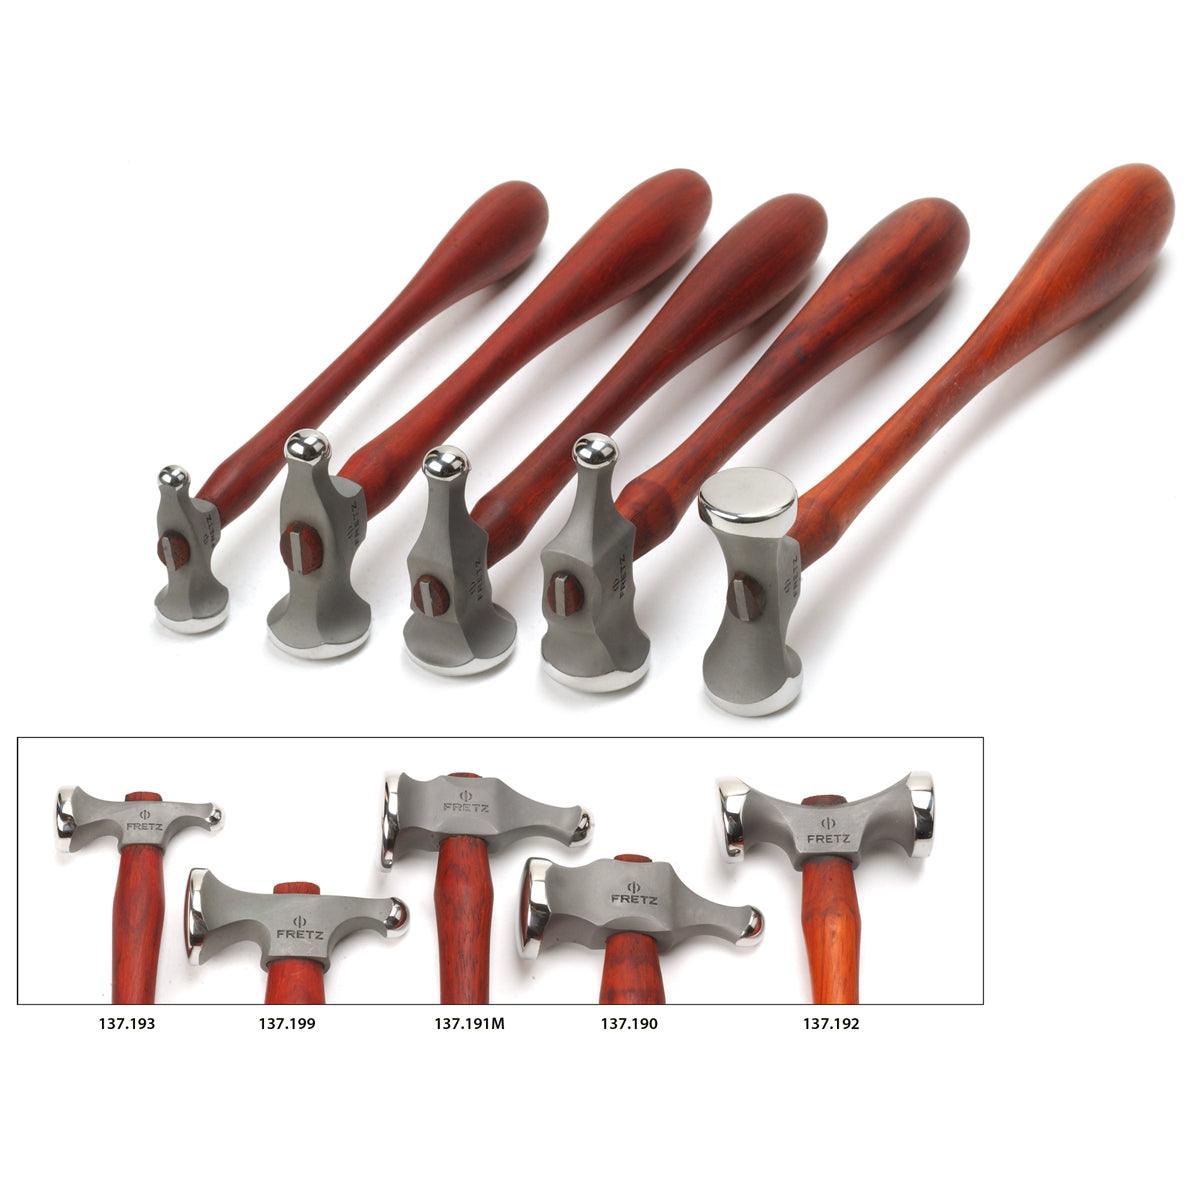 Fretz Chasing Hammers Set of 5 - Forming Tools